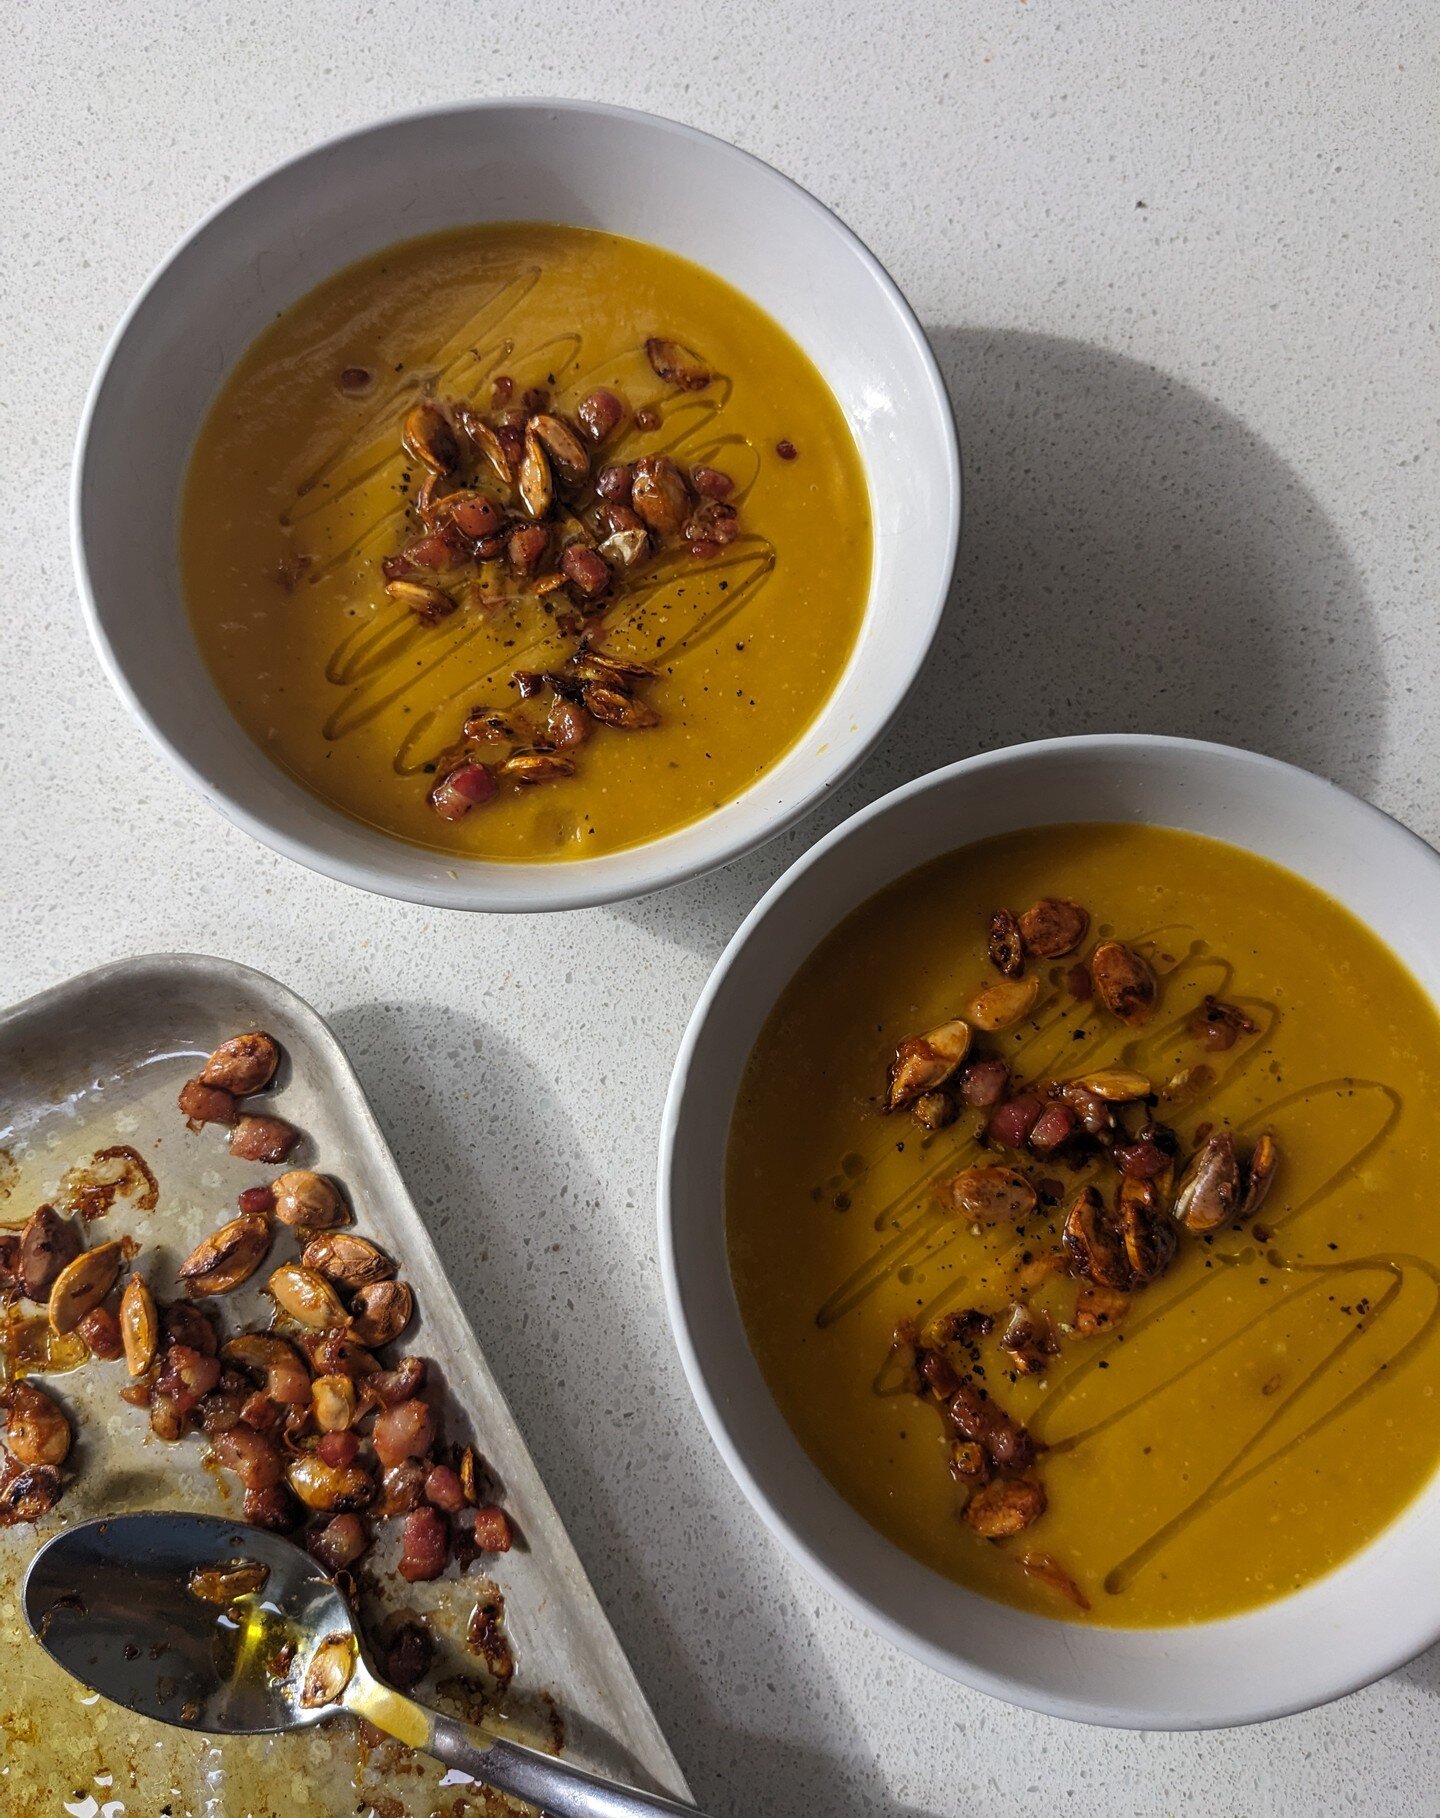 Week of the 16/10 and it feels like the seasons have really shifted:

- Crown Prince pumpkin (a huge glut grown by my mother) ginger and miso soup. Topped with smoked pancetta lardons and toasted pumpkin seeds.

-&nbsp;Maccerating blackberries ❤️

- 